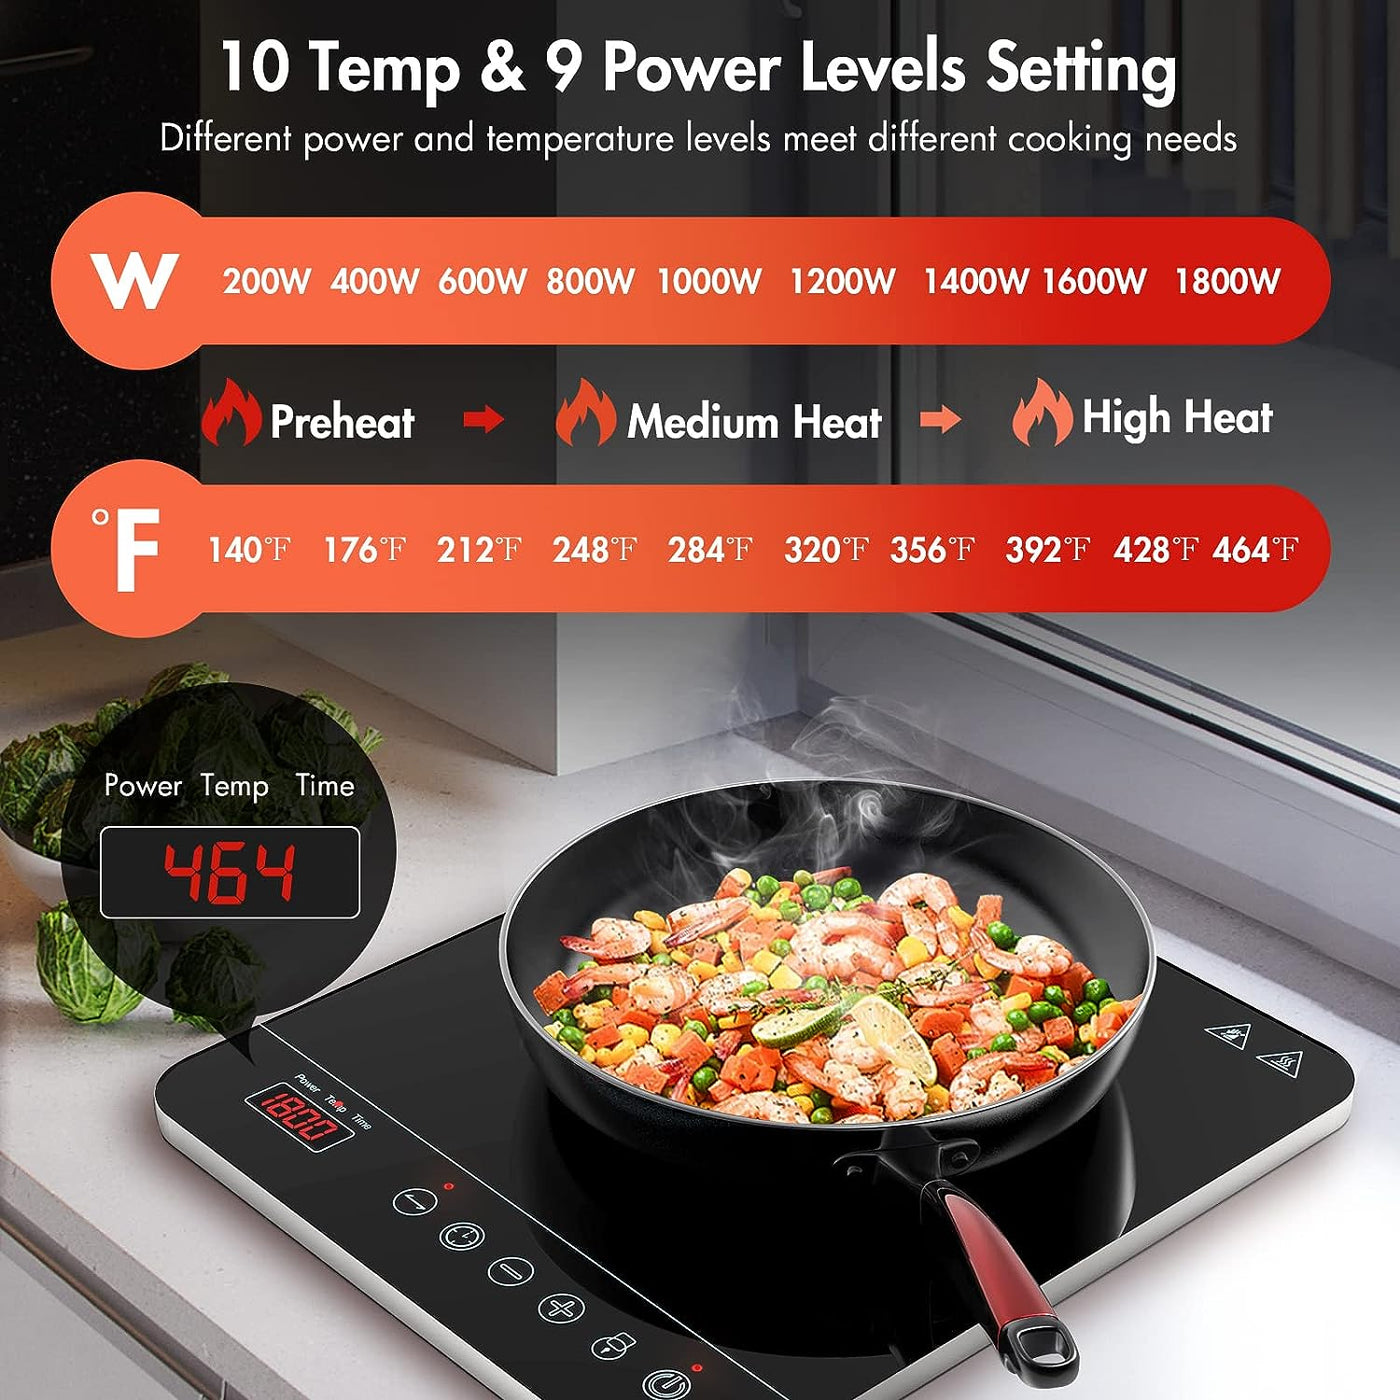 Aaobosi 1800W portable induction cooktop with 9 different power settings and 10 temperature presets for precise cooking control